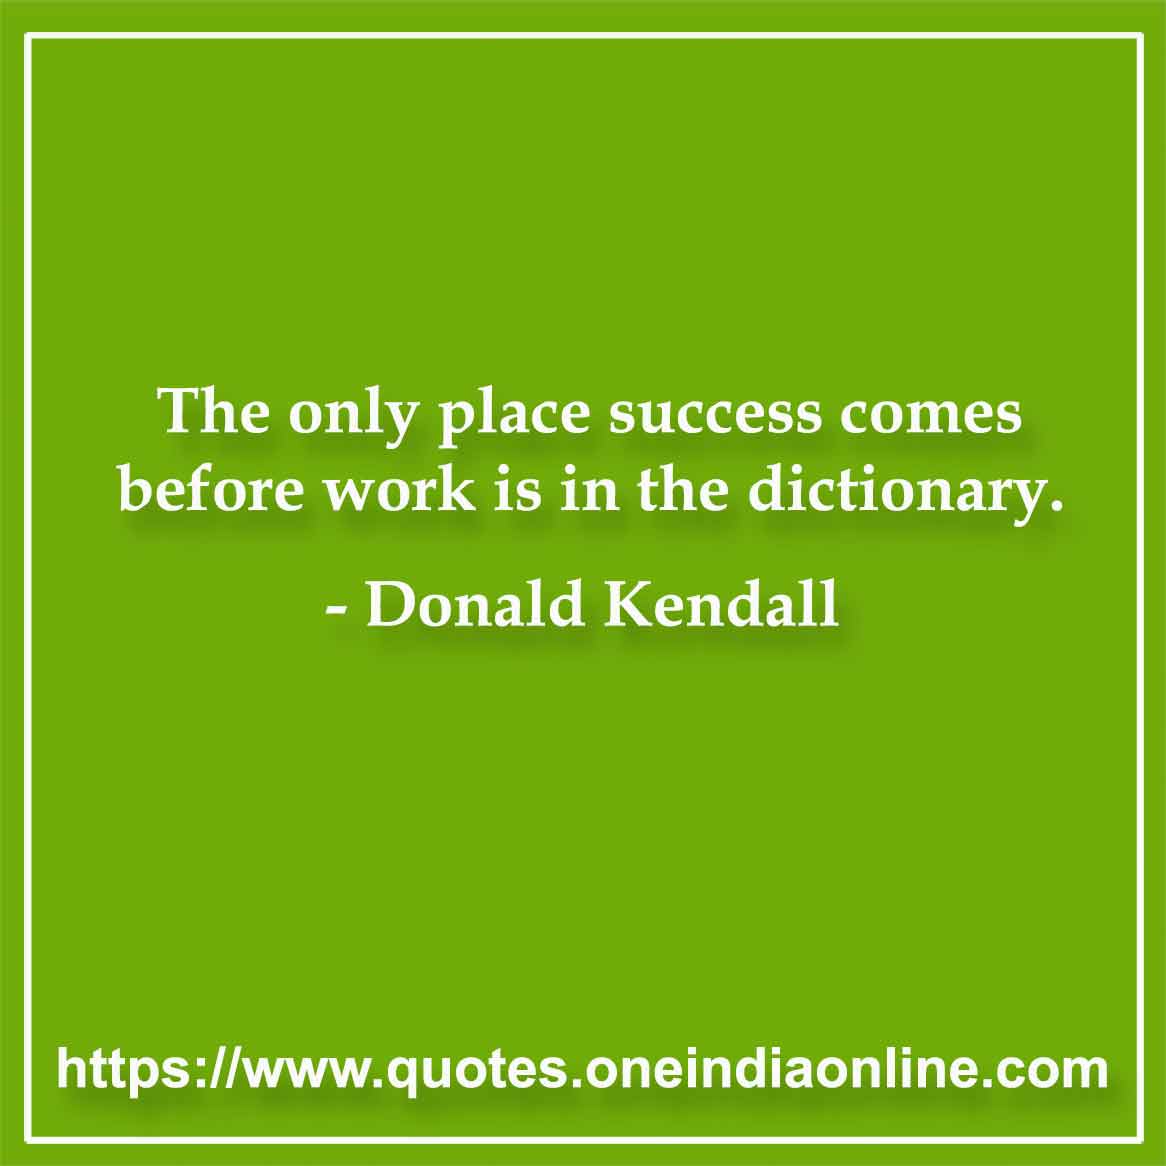 The only place success comes before work is in the dictionary. Donald Kendall 